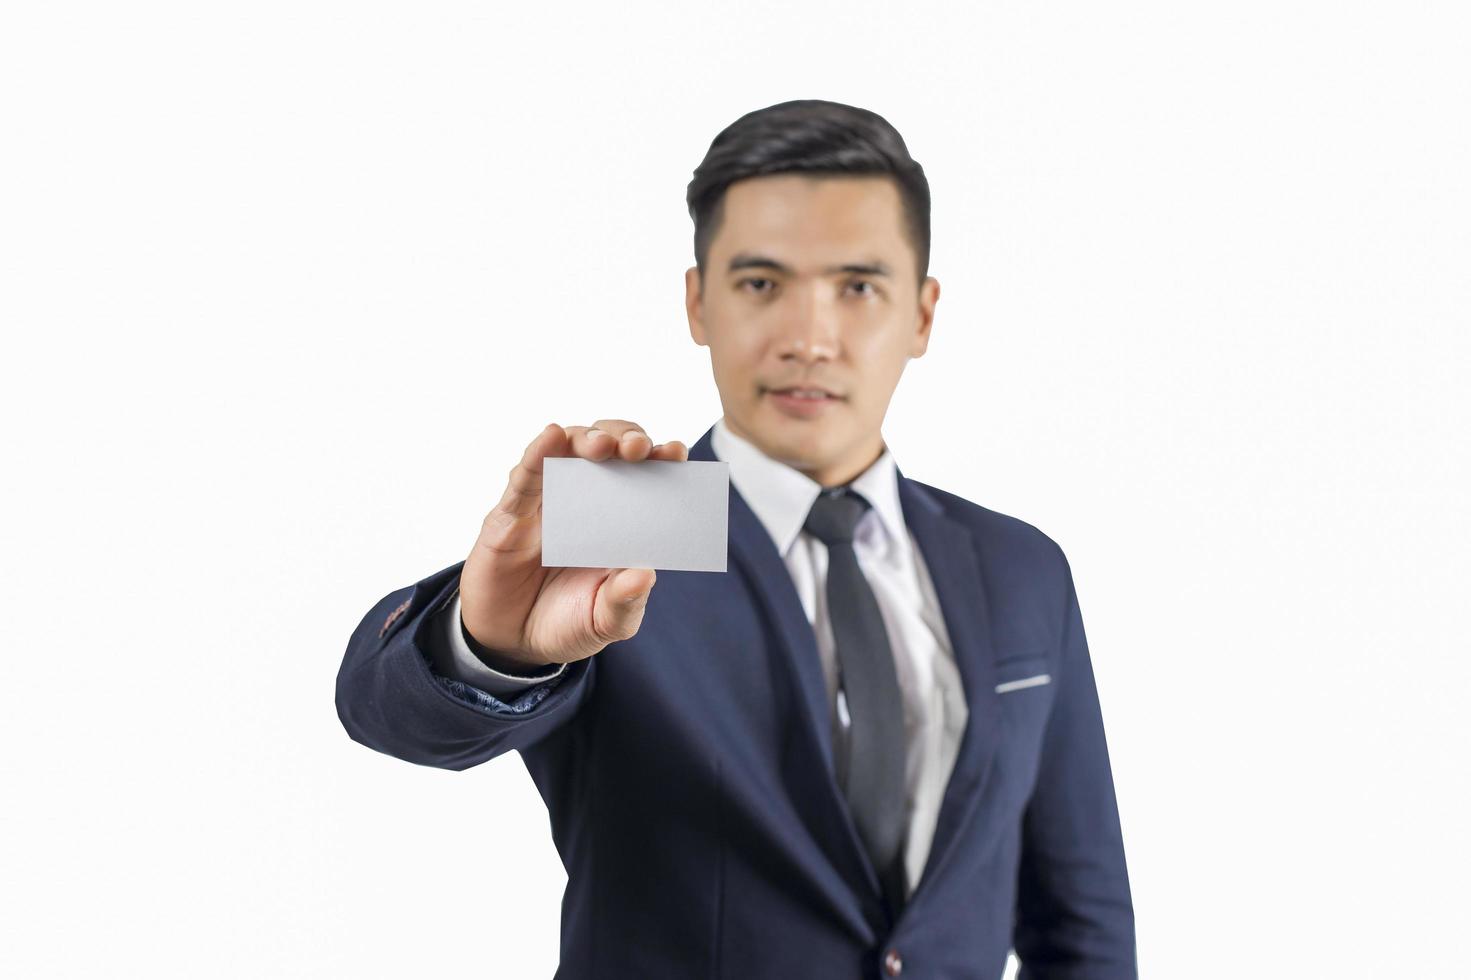 Handsome businessman holding blank business card isolate on white background photo